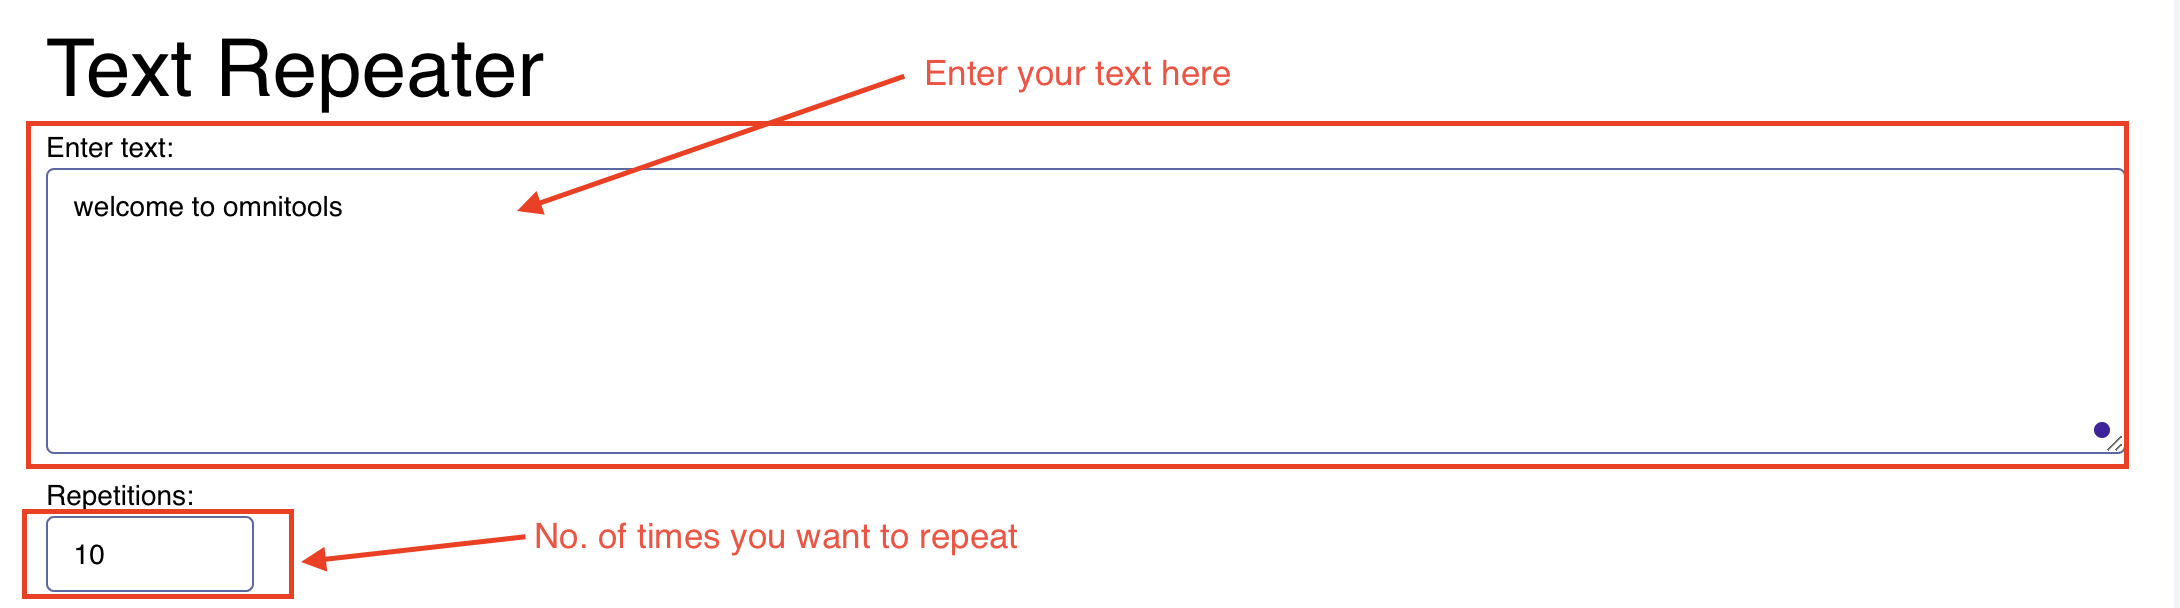 Text repeater - repeat text online